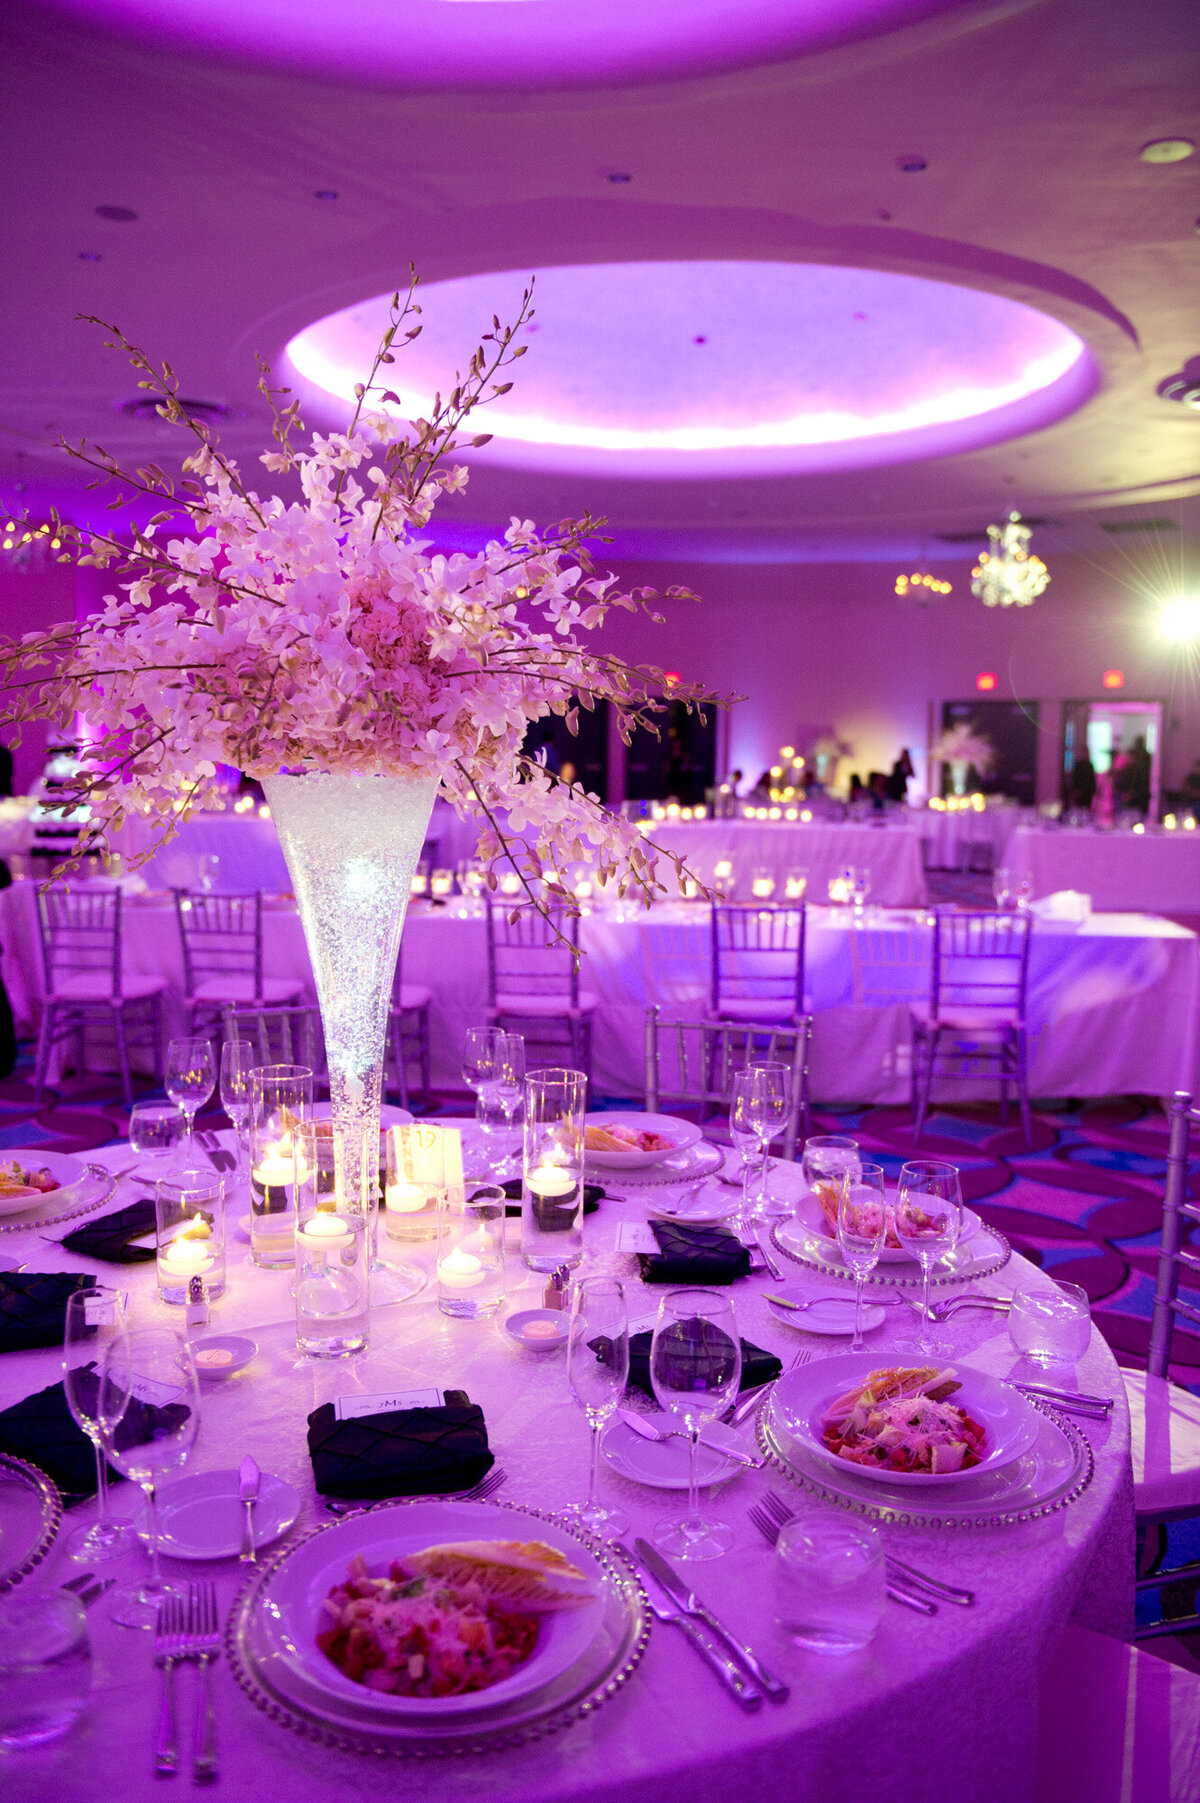 Elegant wedding reception in a hall with dinner tables, chairs and  floral centerpieces in purple theme